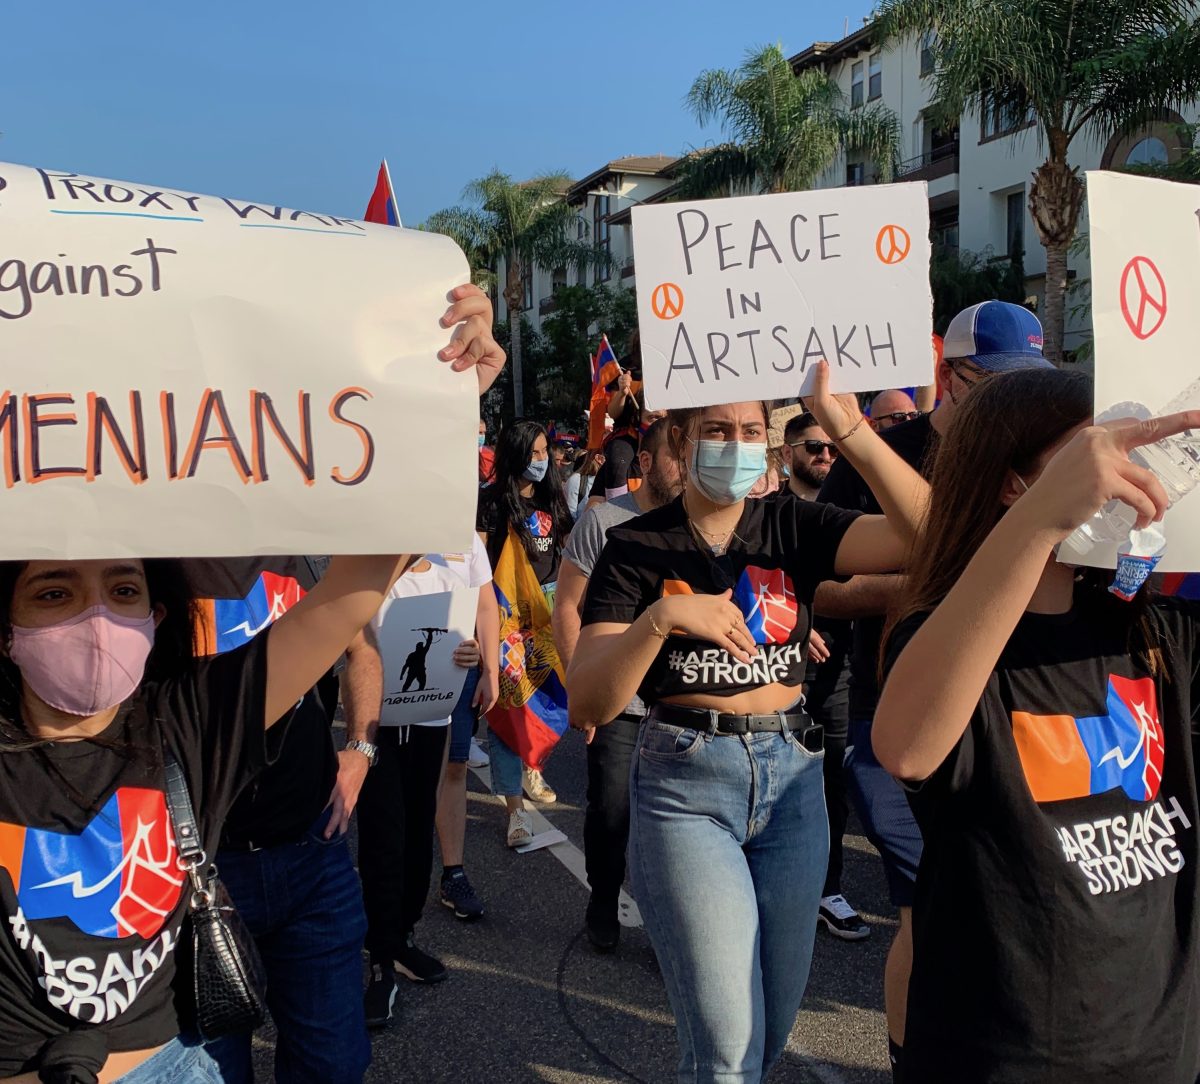 Members of the Armenian Club march in support of Artsakh